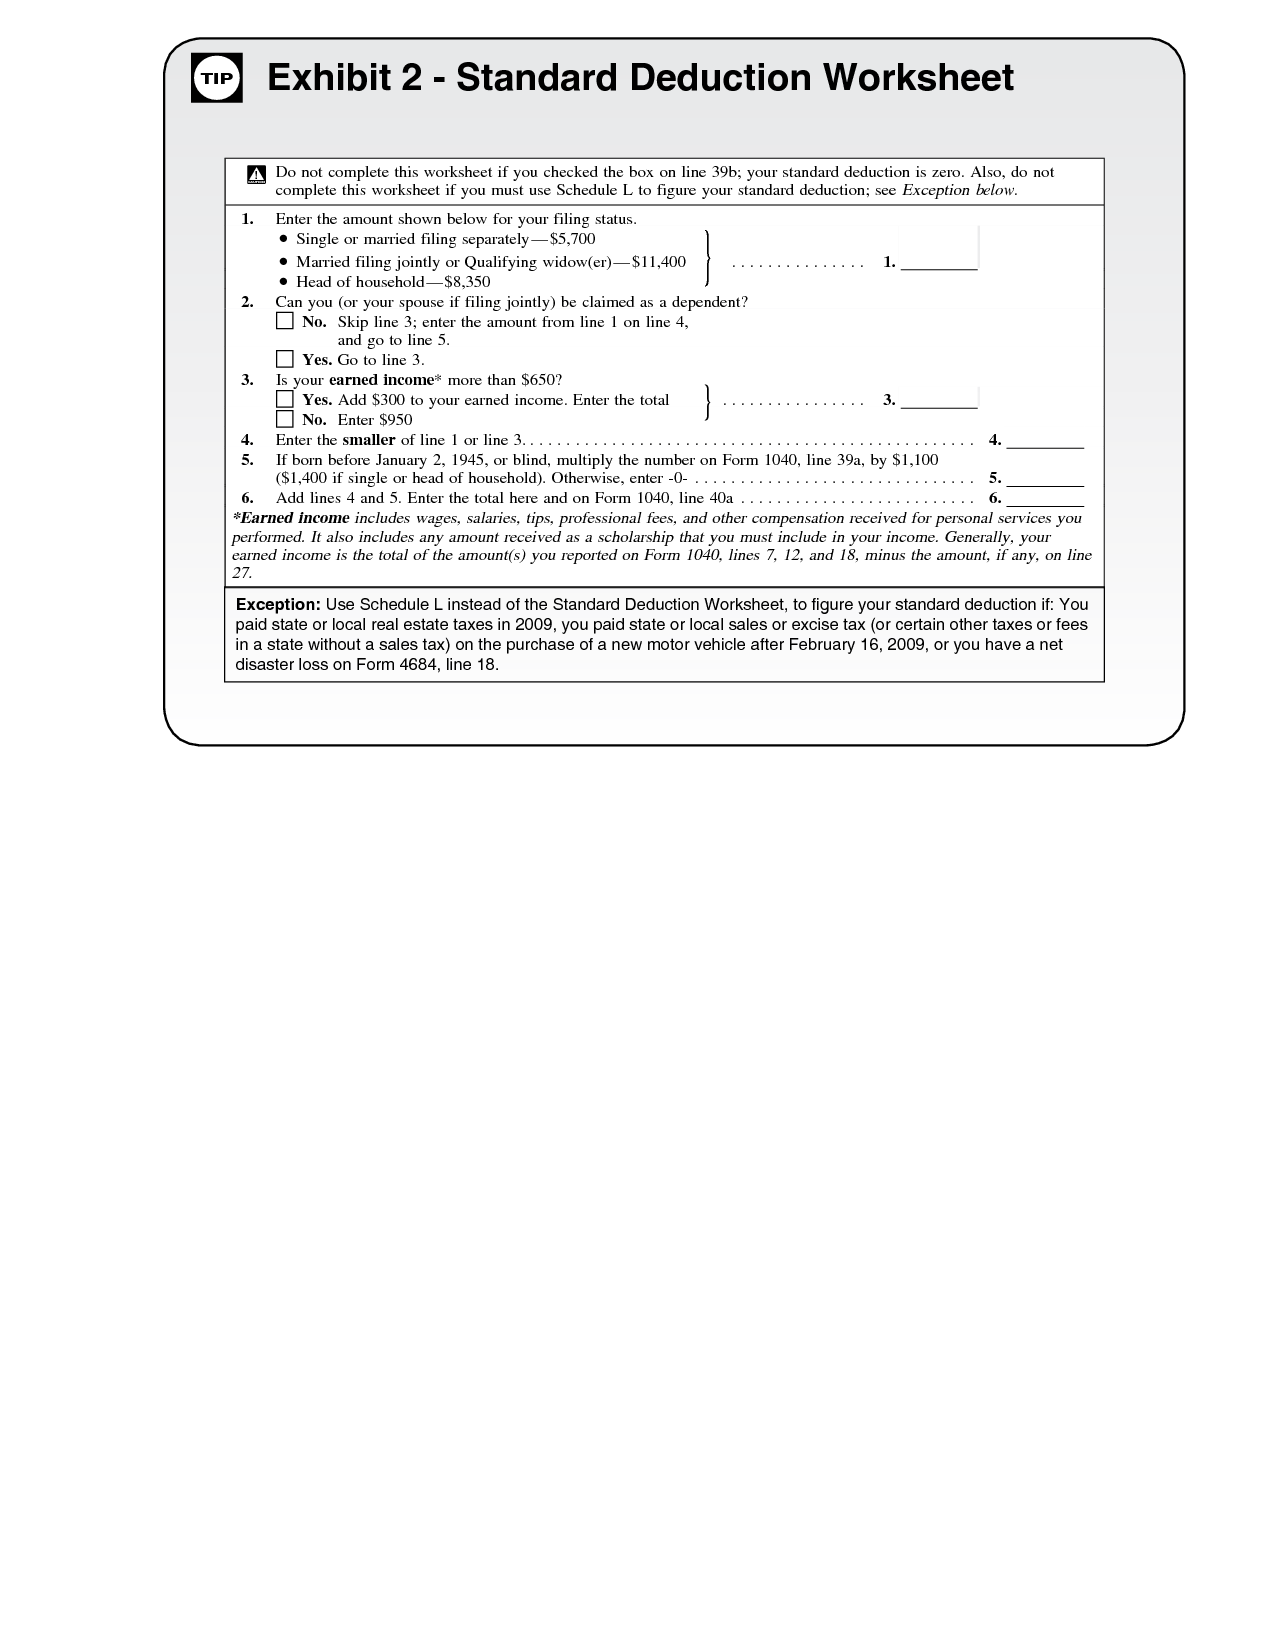 10 Best Images of 2014 Itemized Deductions Worksheet  1040 Forms Itemized Deductions Worksheet 